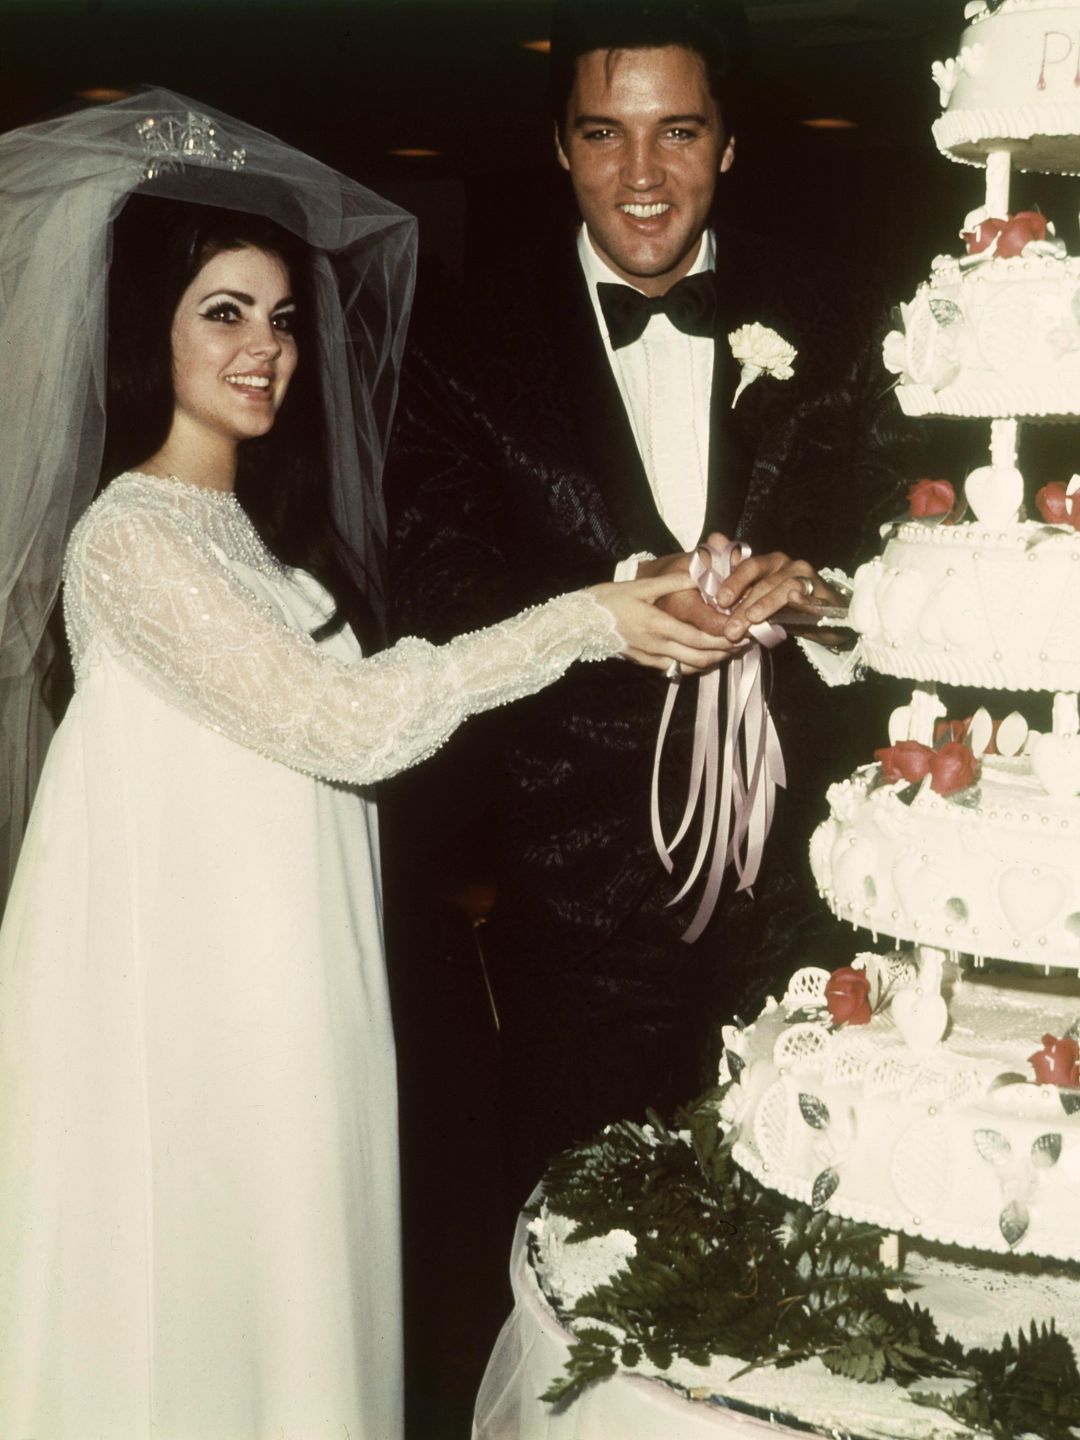 Priscilla Presley wearing a floaty wedding dress while cutting her wedding cake with Elvis